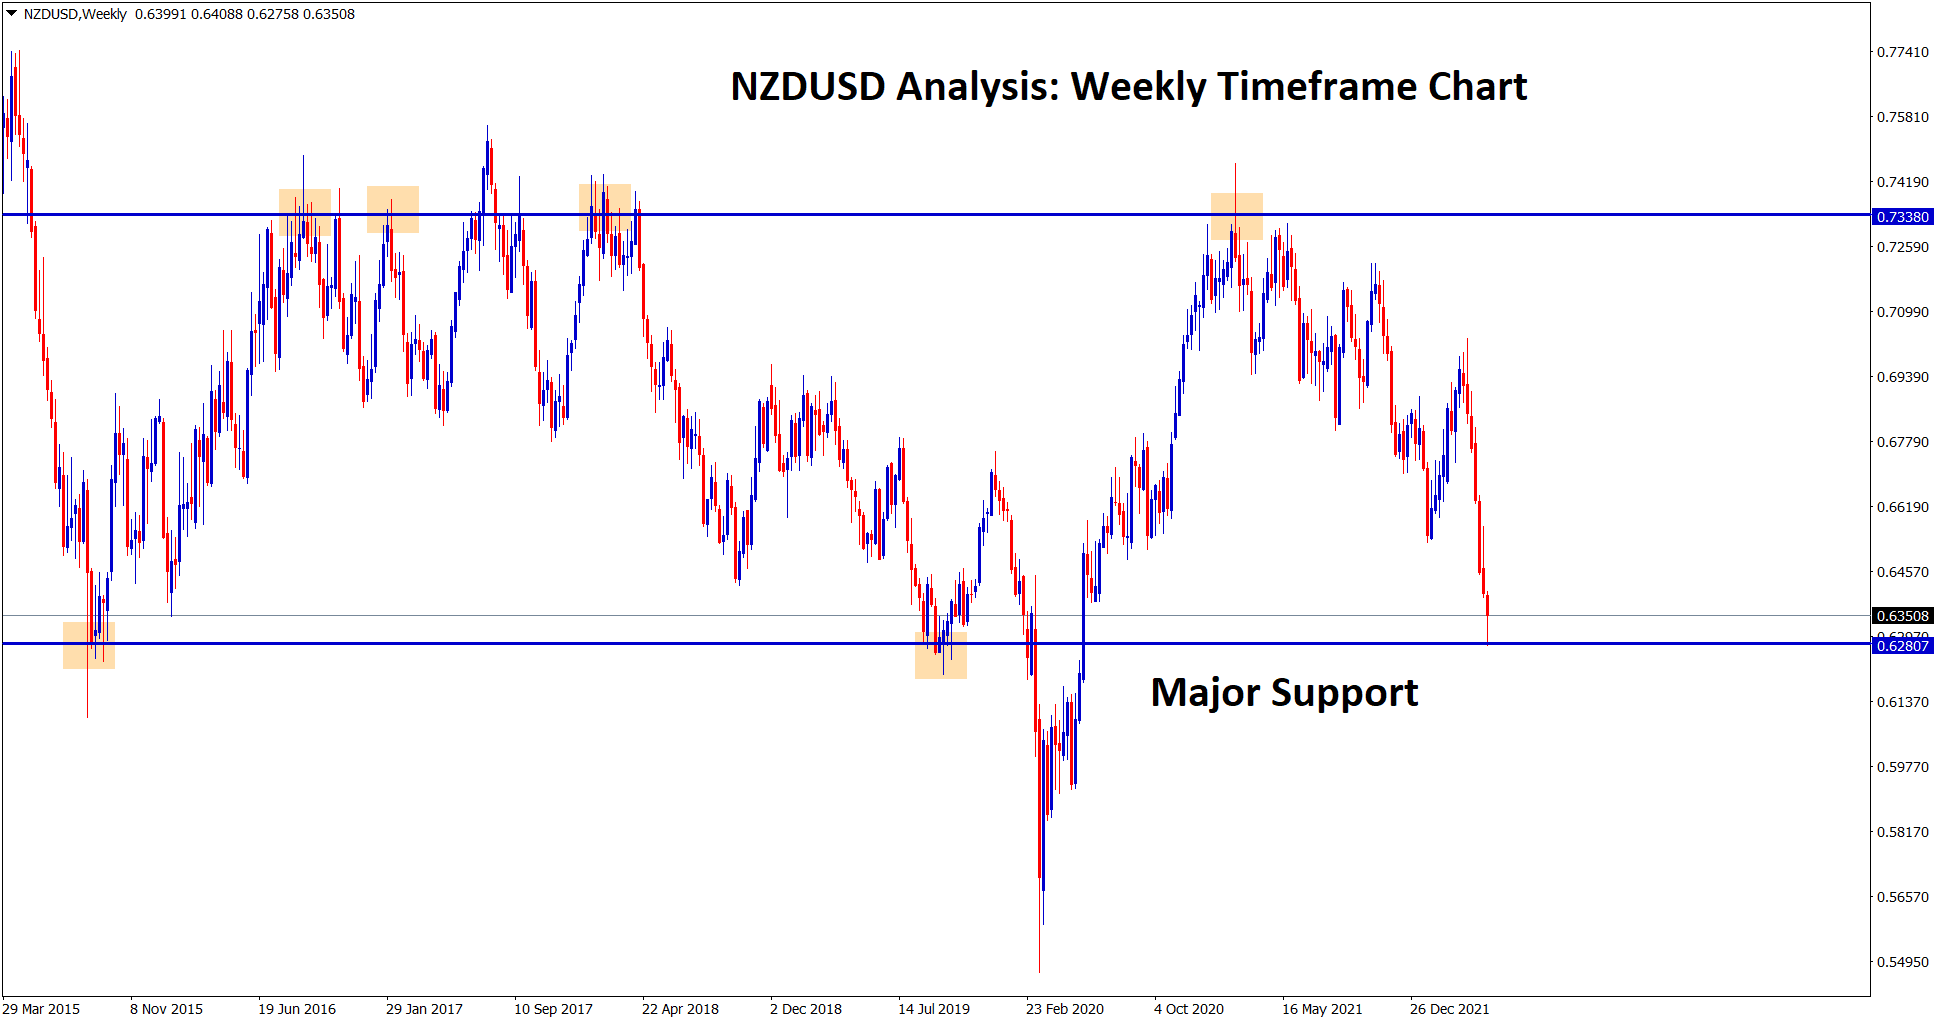 NZDUSD at the major support area